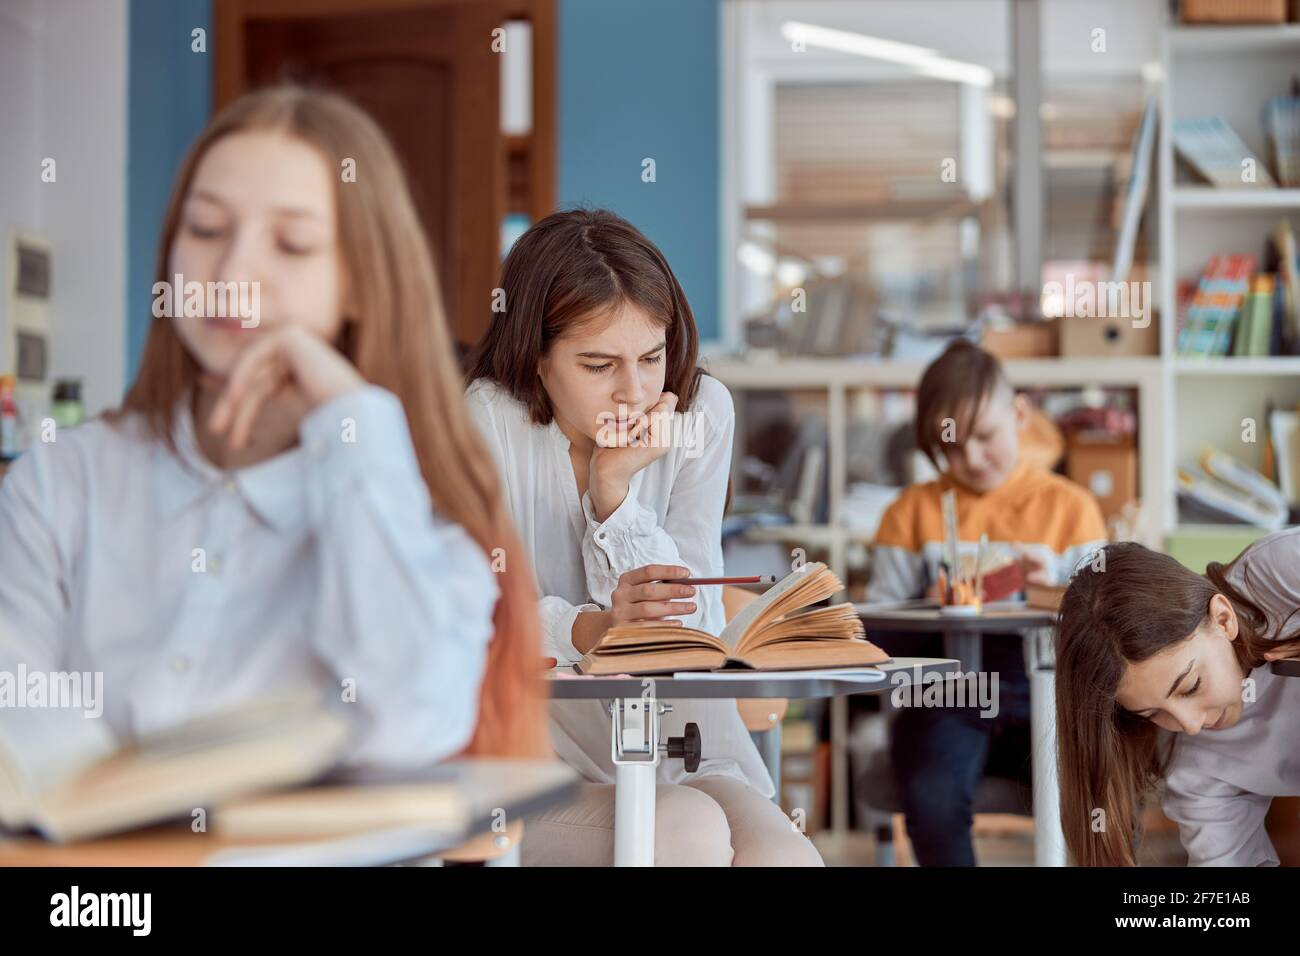 Young girl looks absent-minded in reading. Elementary school kids sitting on desks and reading books in classroom Stock Photo